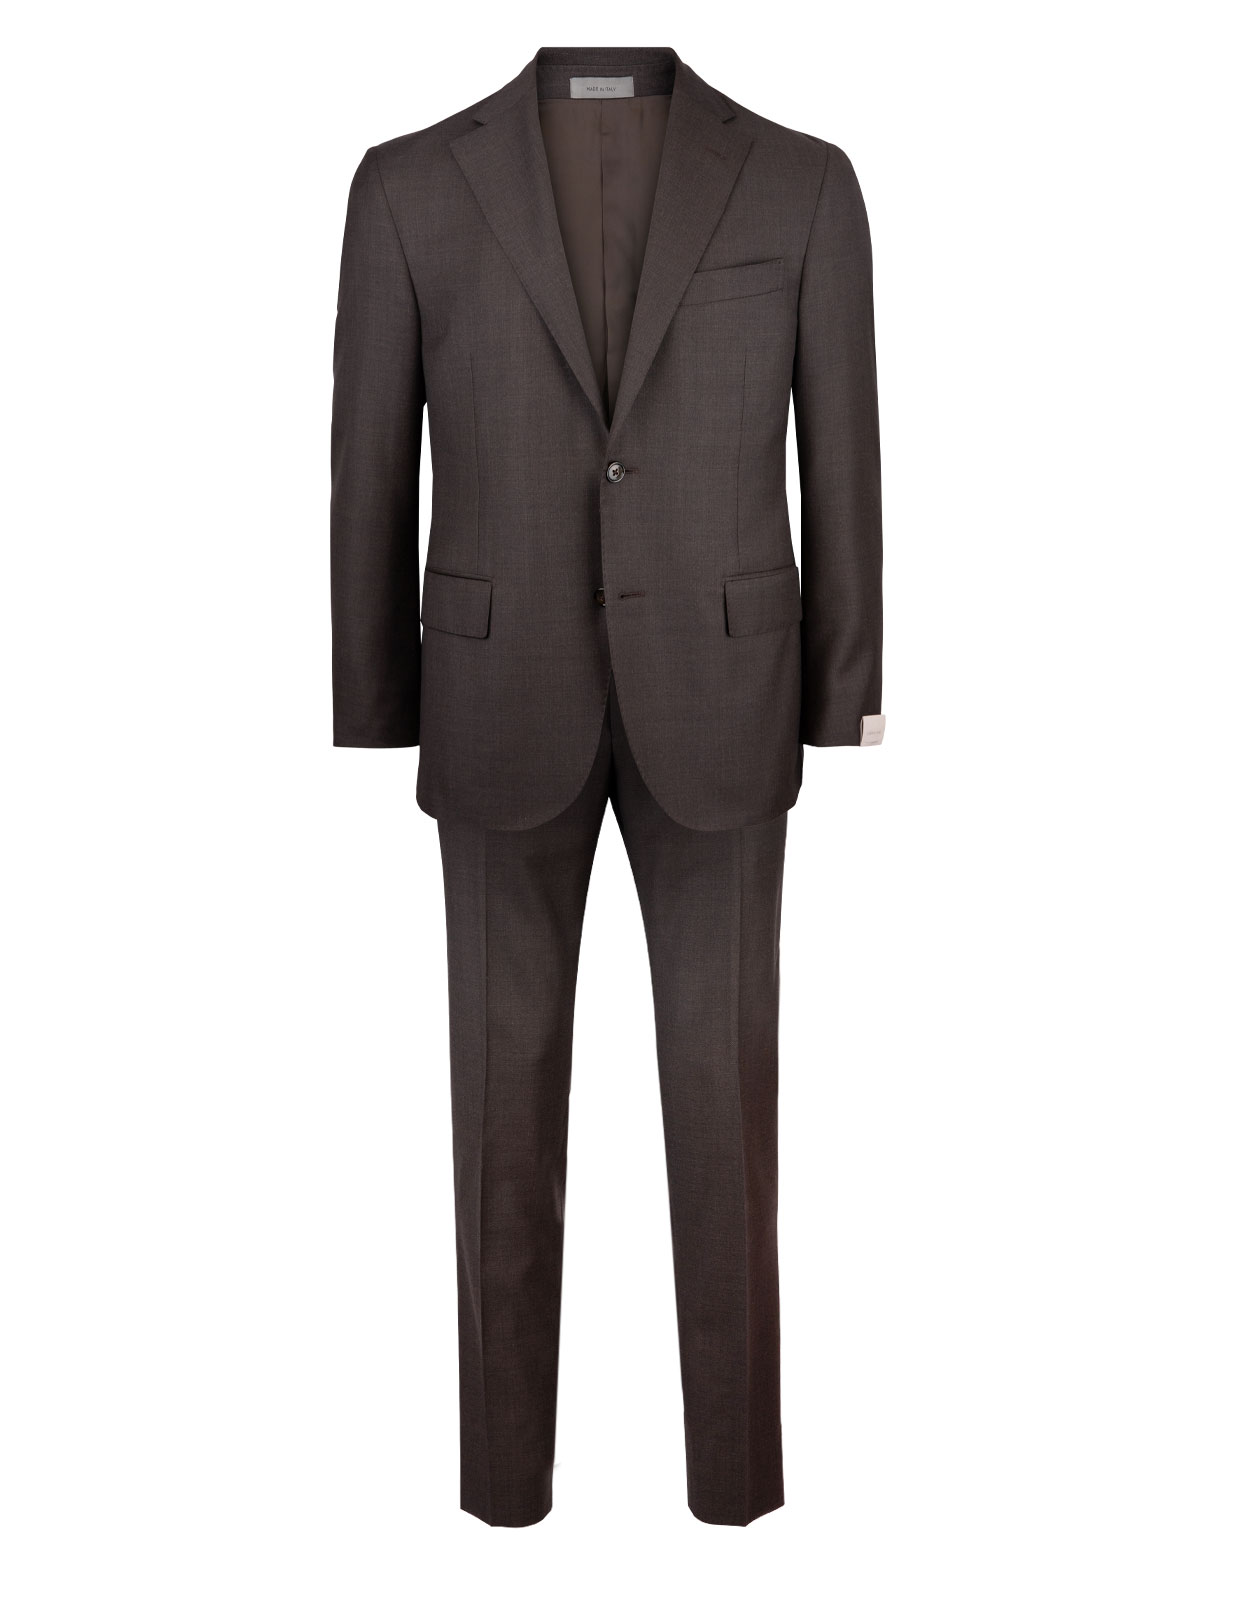 Academy Soft Suit 130's  Wool Brown Stl 56